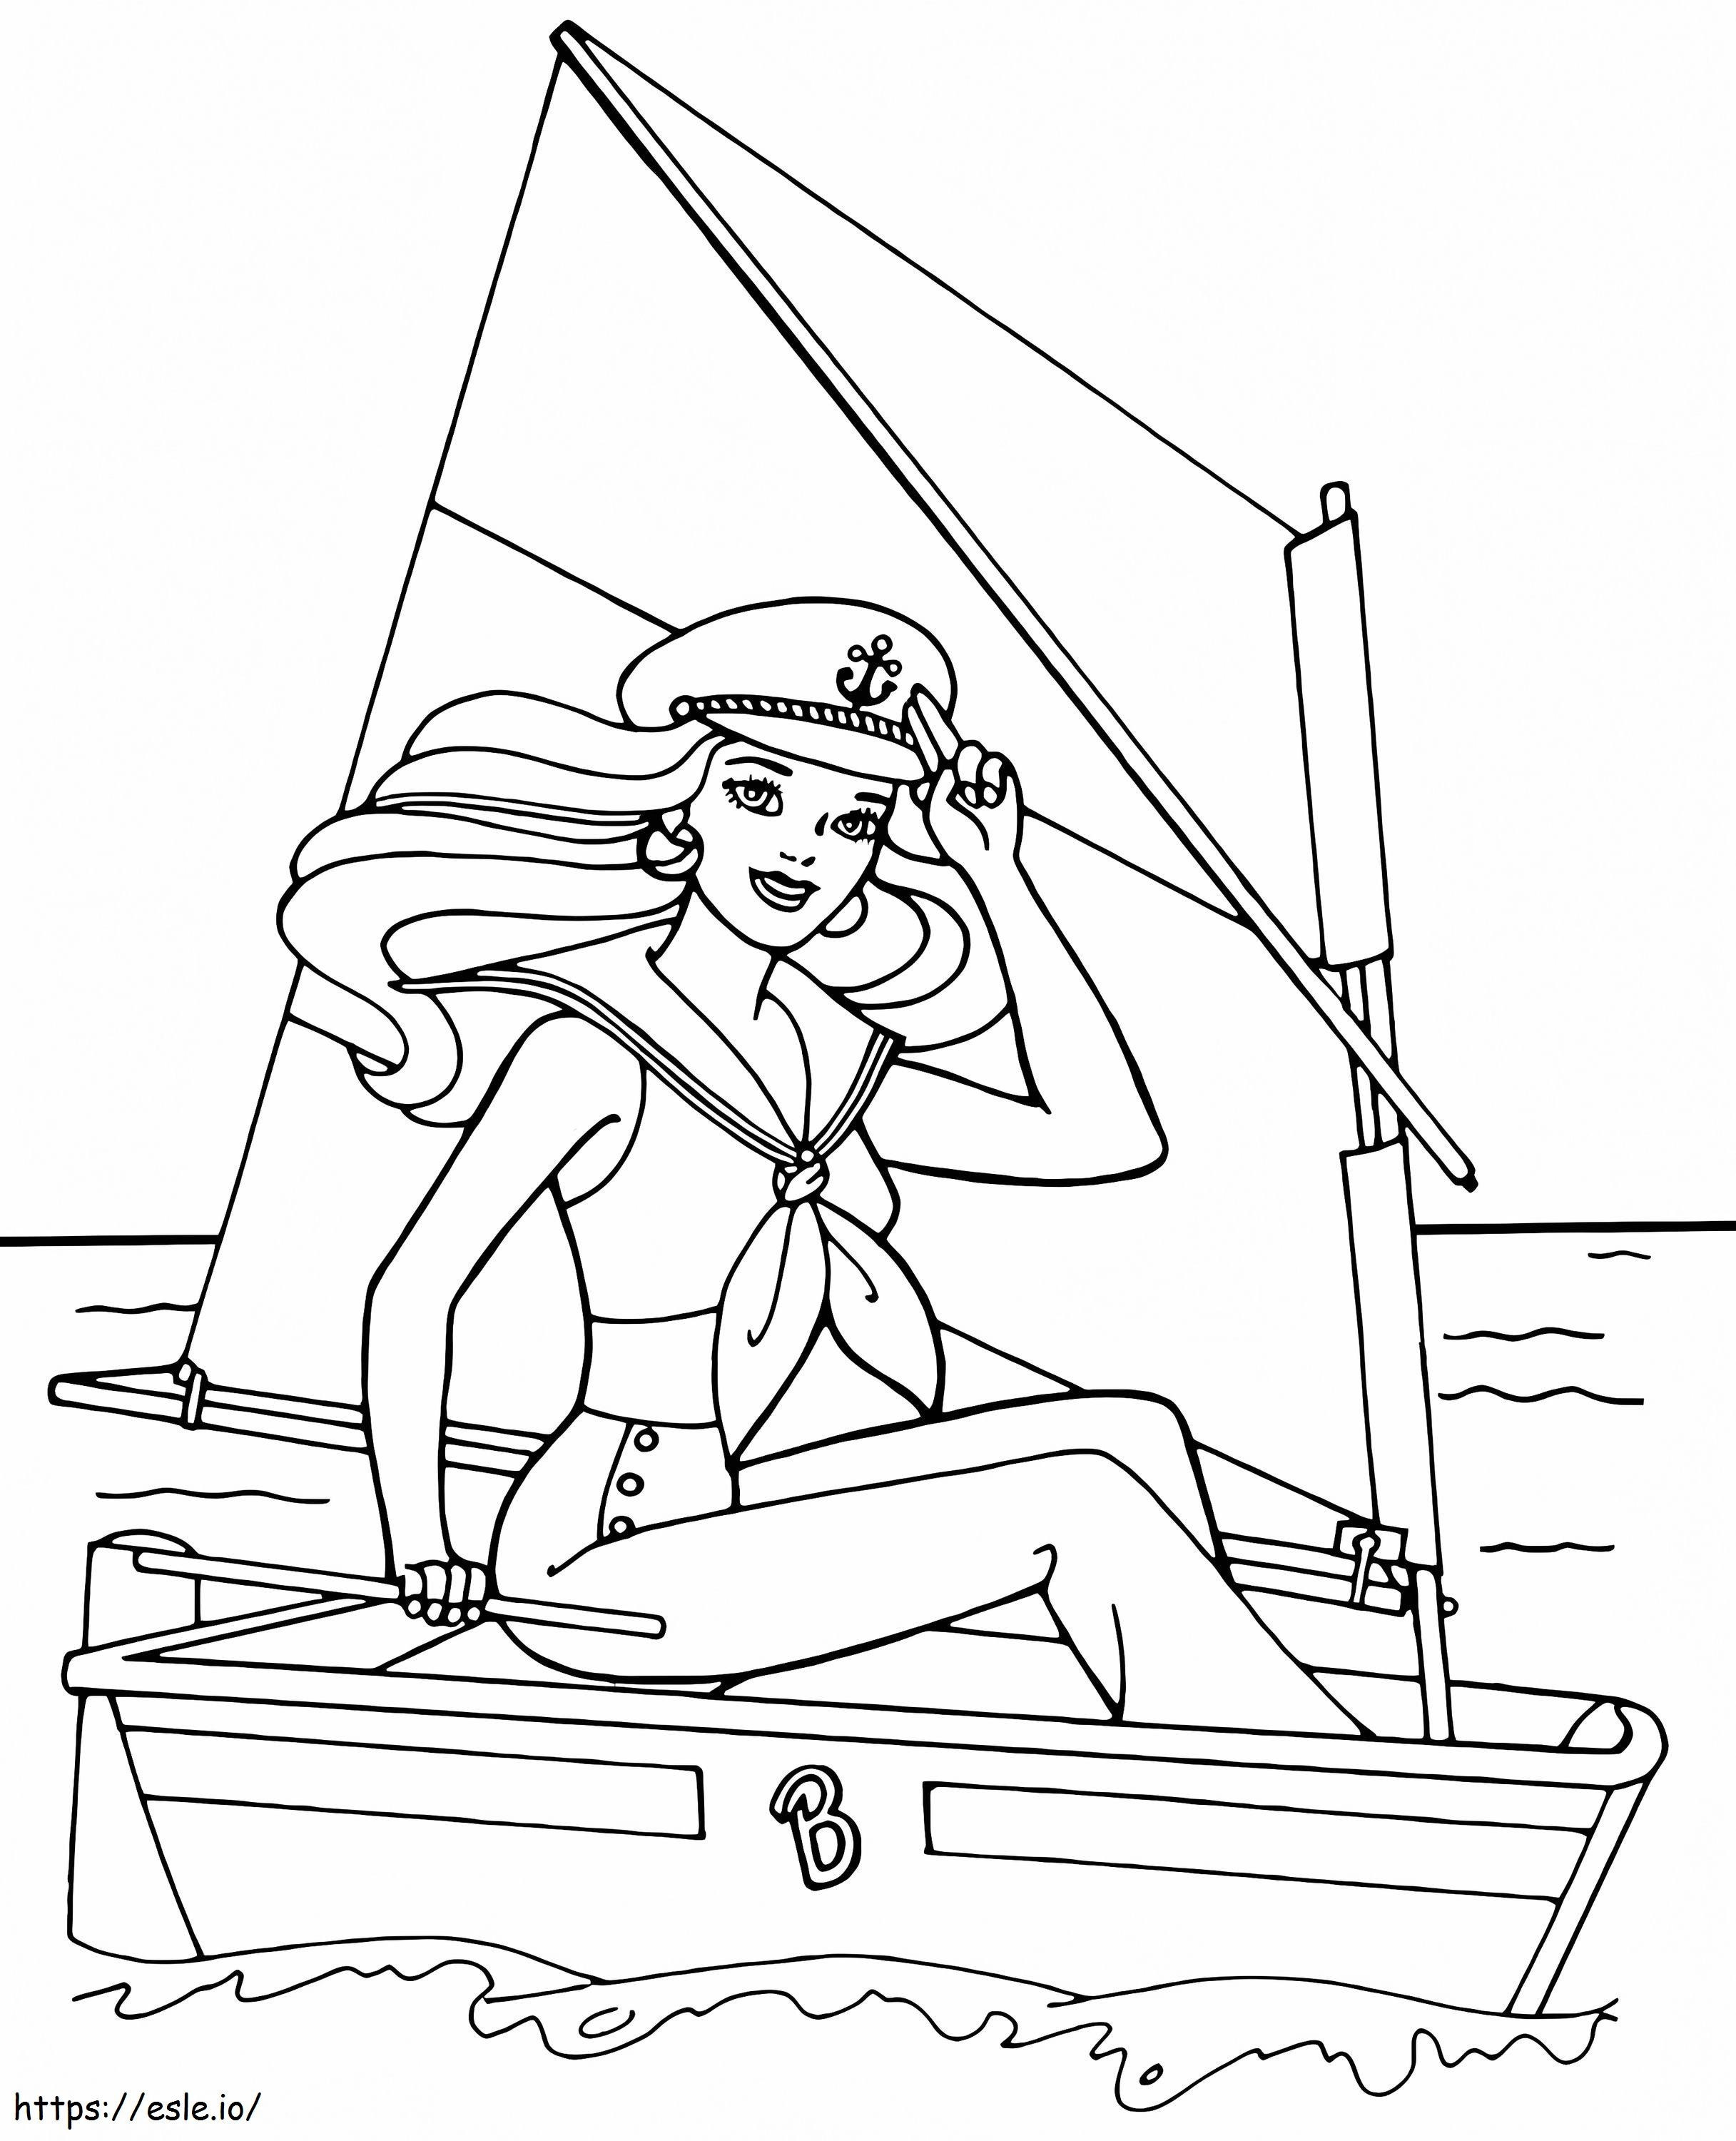 Barbie On Boat coloring page